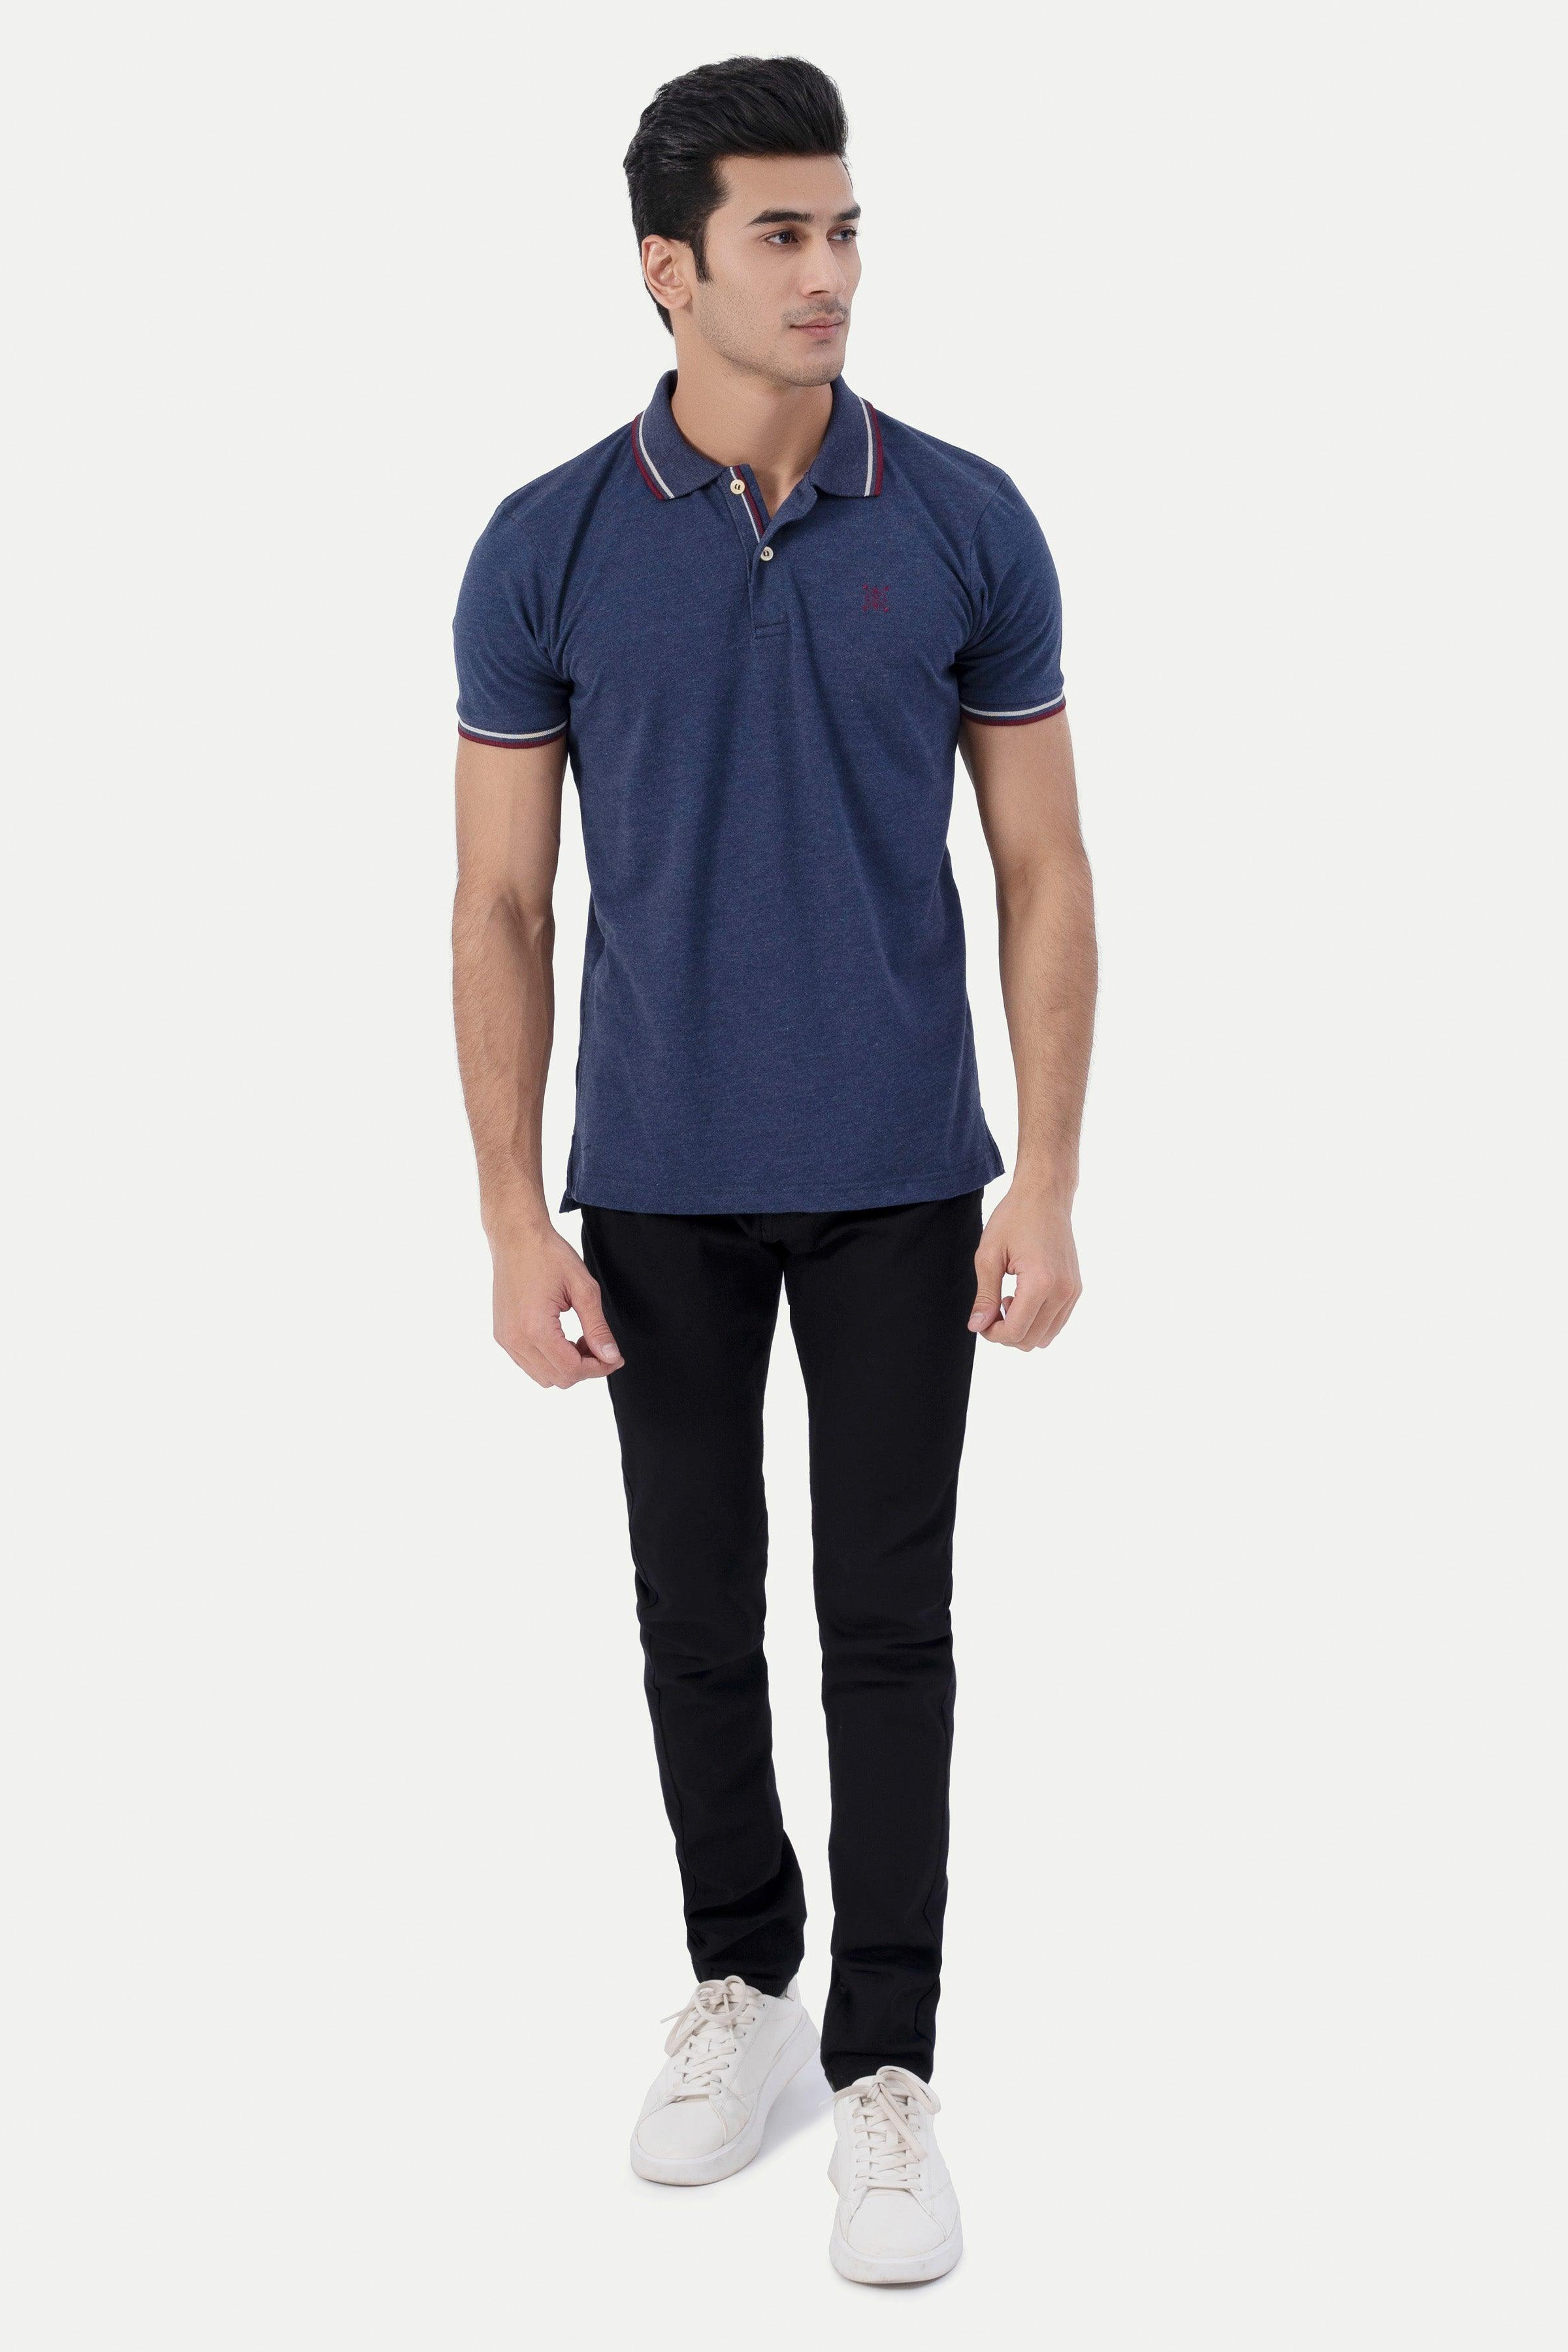 TIPPING POLO BLUE at Charcoal Clothing